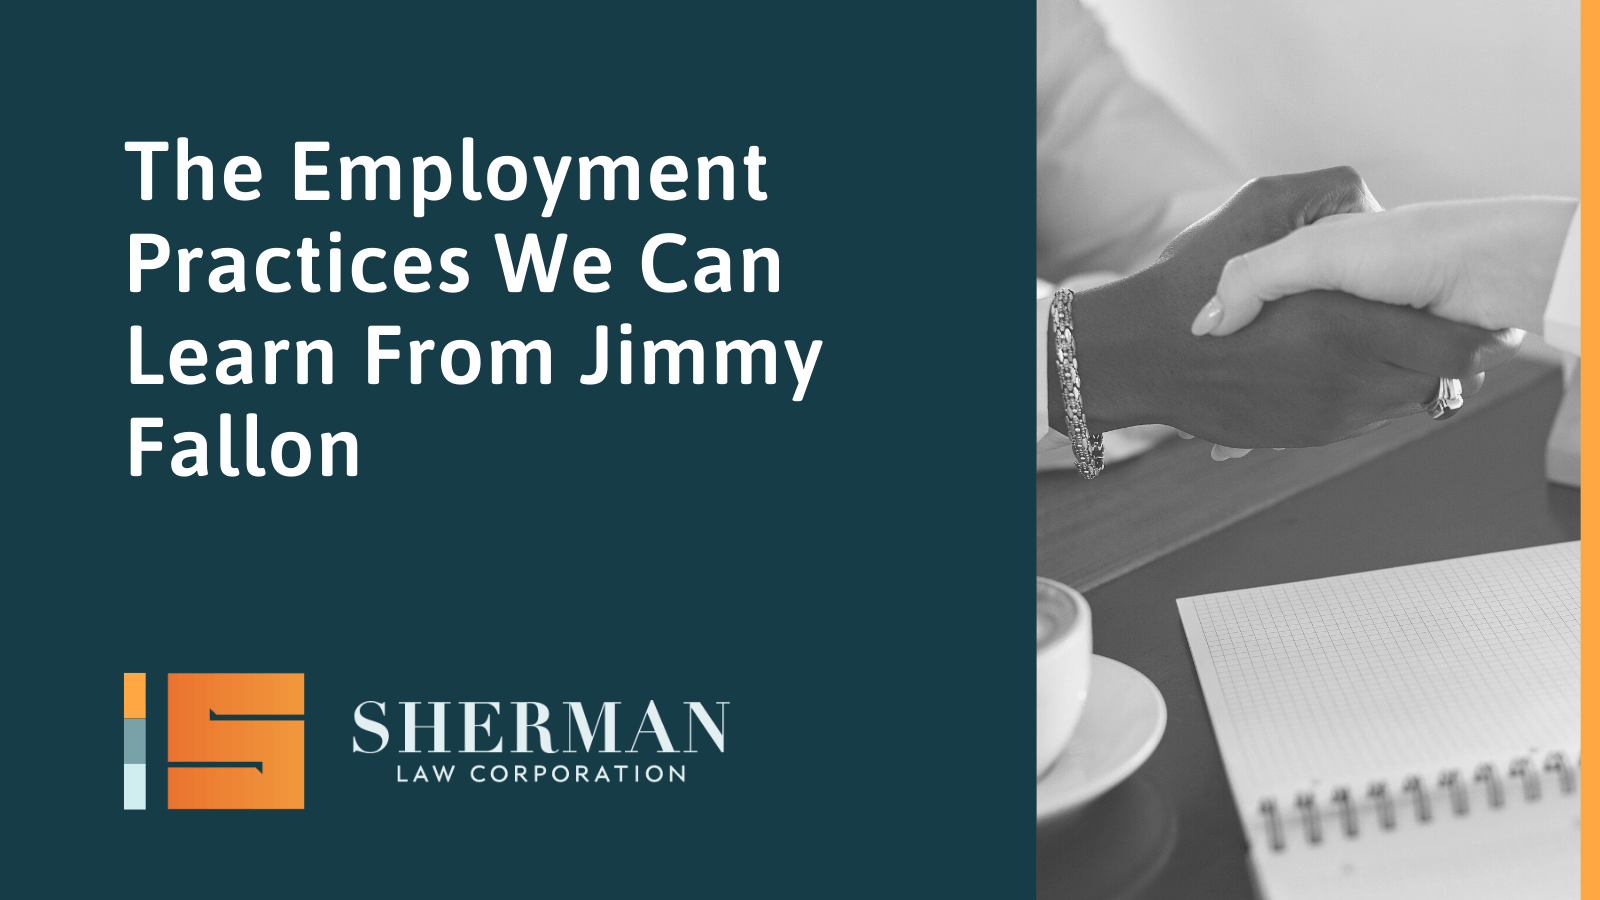 The Employment Practices We Can Learn From Jimmy Fallon- sherman law corporation